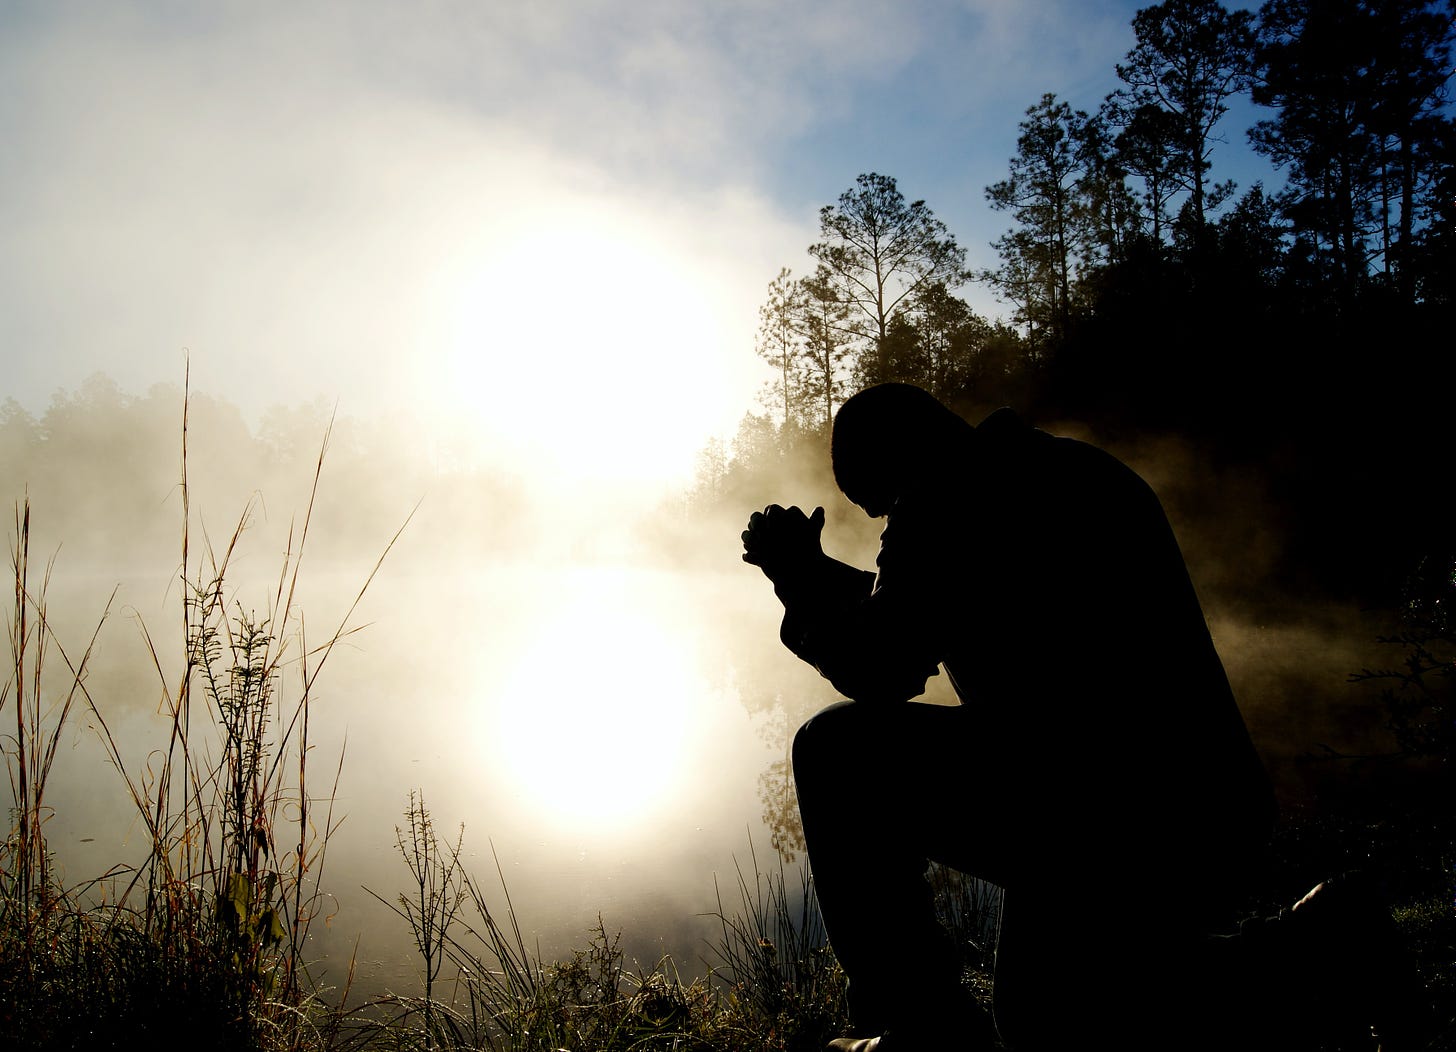 A man is here shrouded in shadows, on one knee in prayer. It's impossible to tell race, and tbh I'm just guessing on gender. He's in a grassy, forested area and is facing toward a pond, over which a bright sun is rising or setting. The sky is blue and clouds are out and shit